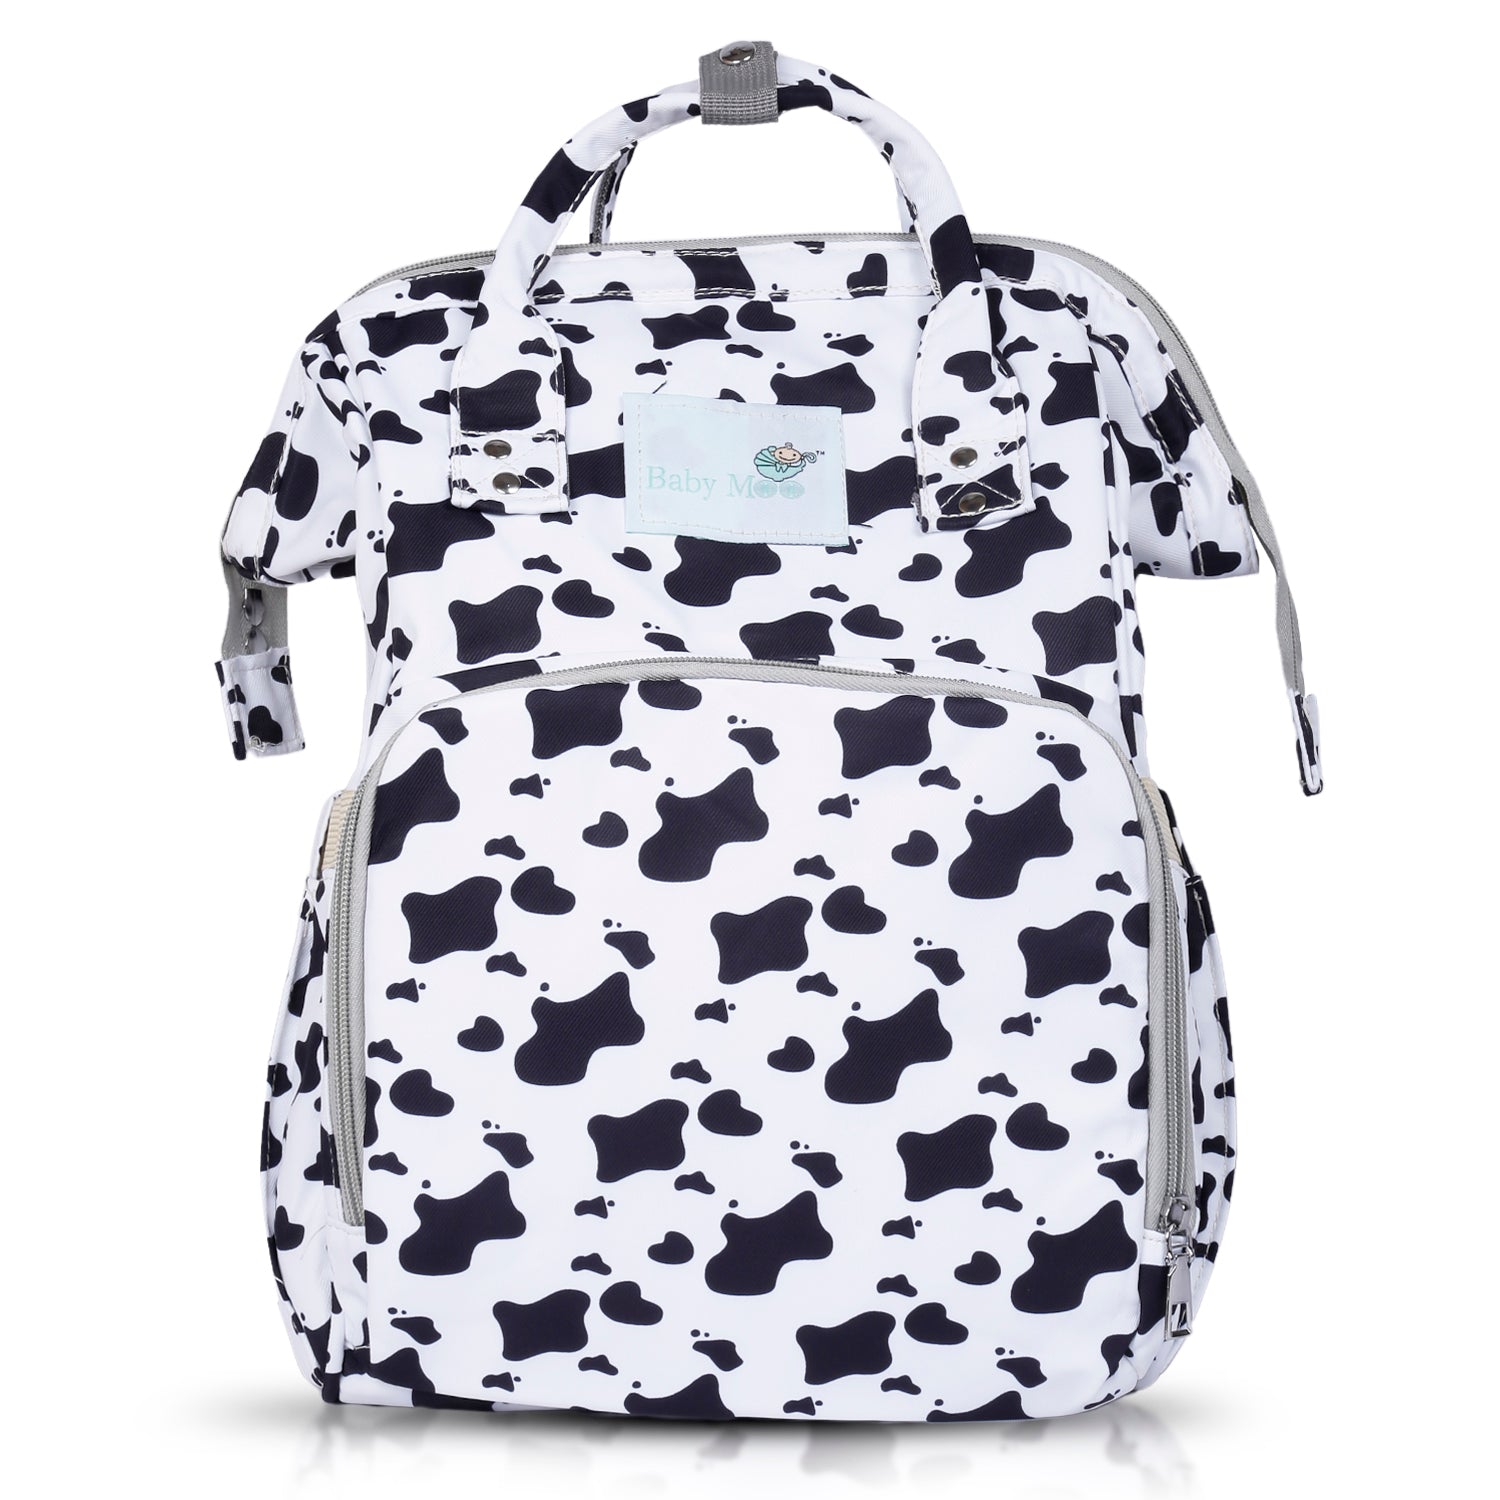 Diaper Bag 
Maternity Backpack Cow Black And White - Baby Moo